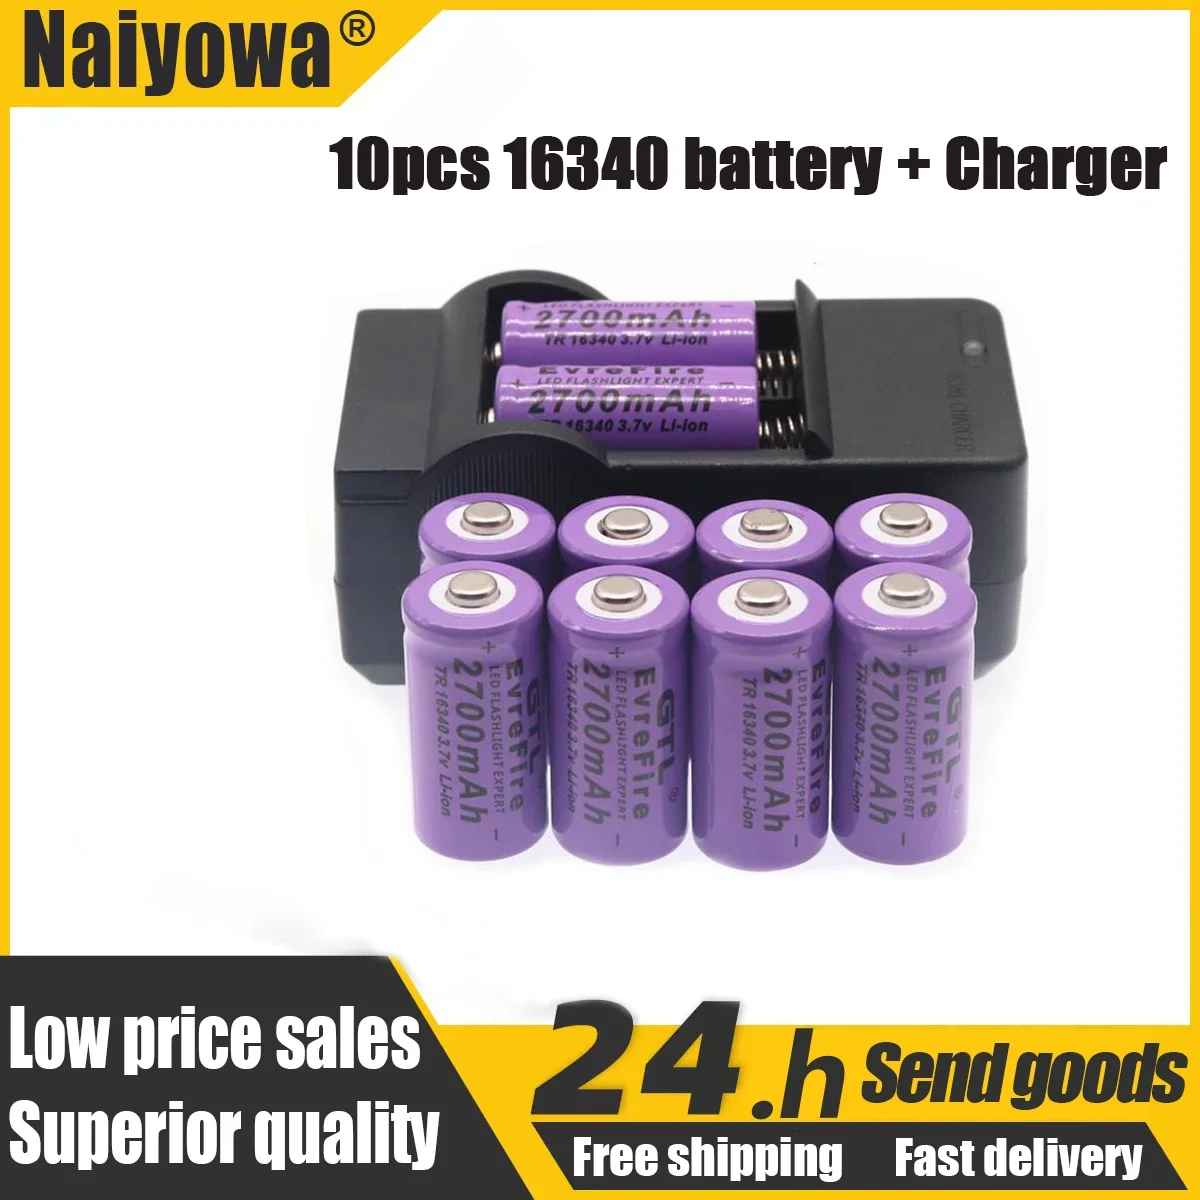 

100% New original 16340 Battery CR123A 16340 Battery 2700mAh 3.7V Li-ion Rechargeable Battery+16340Charger